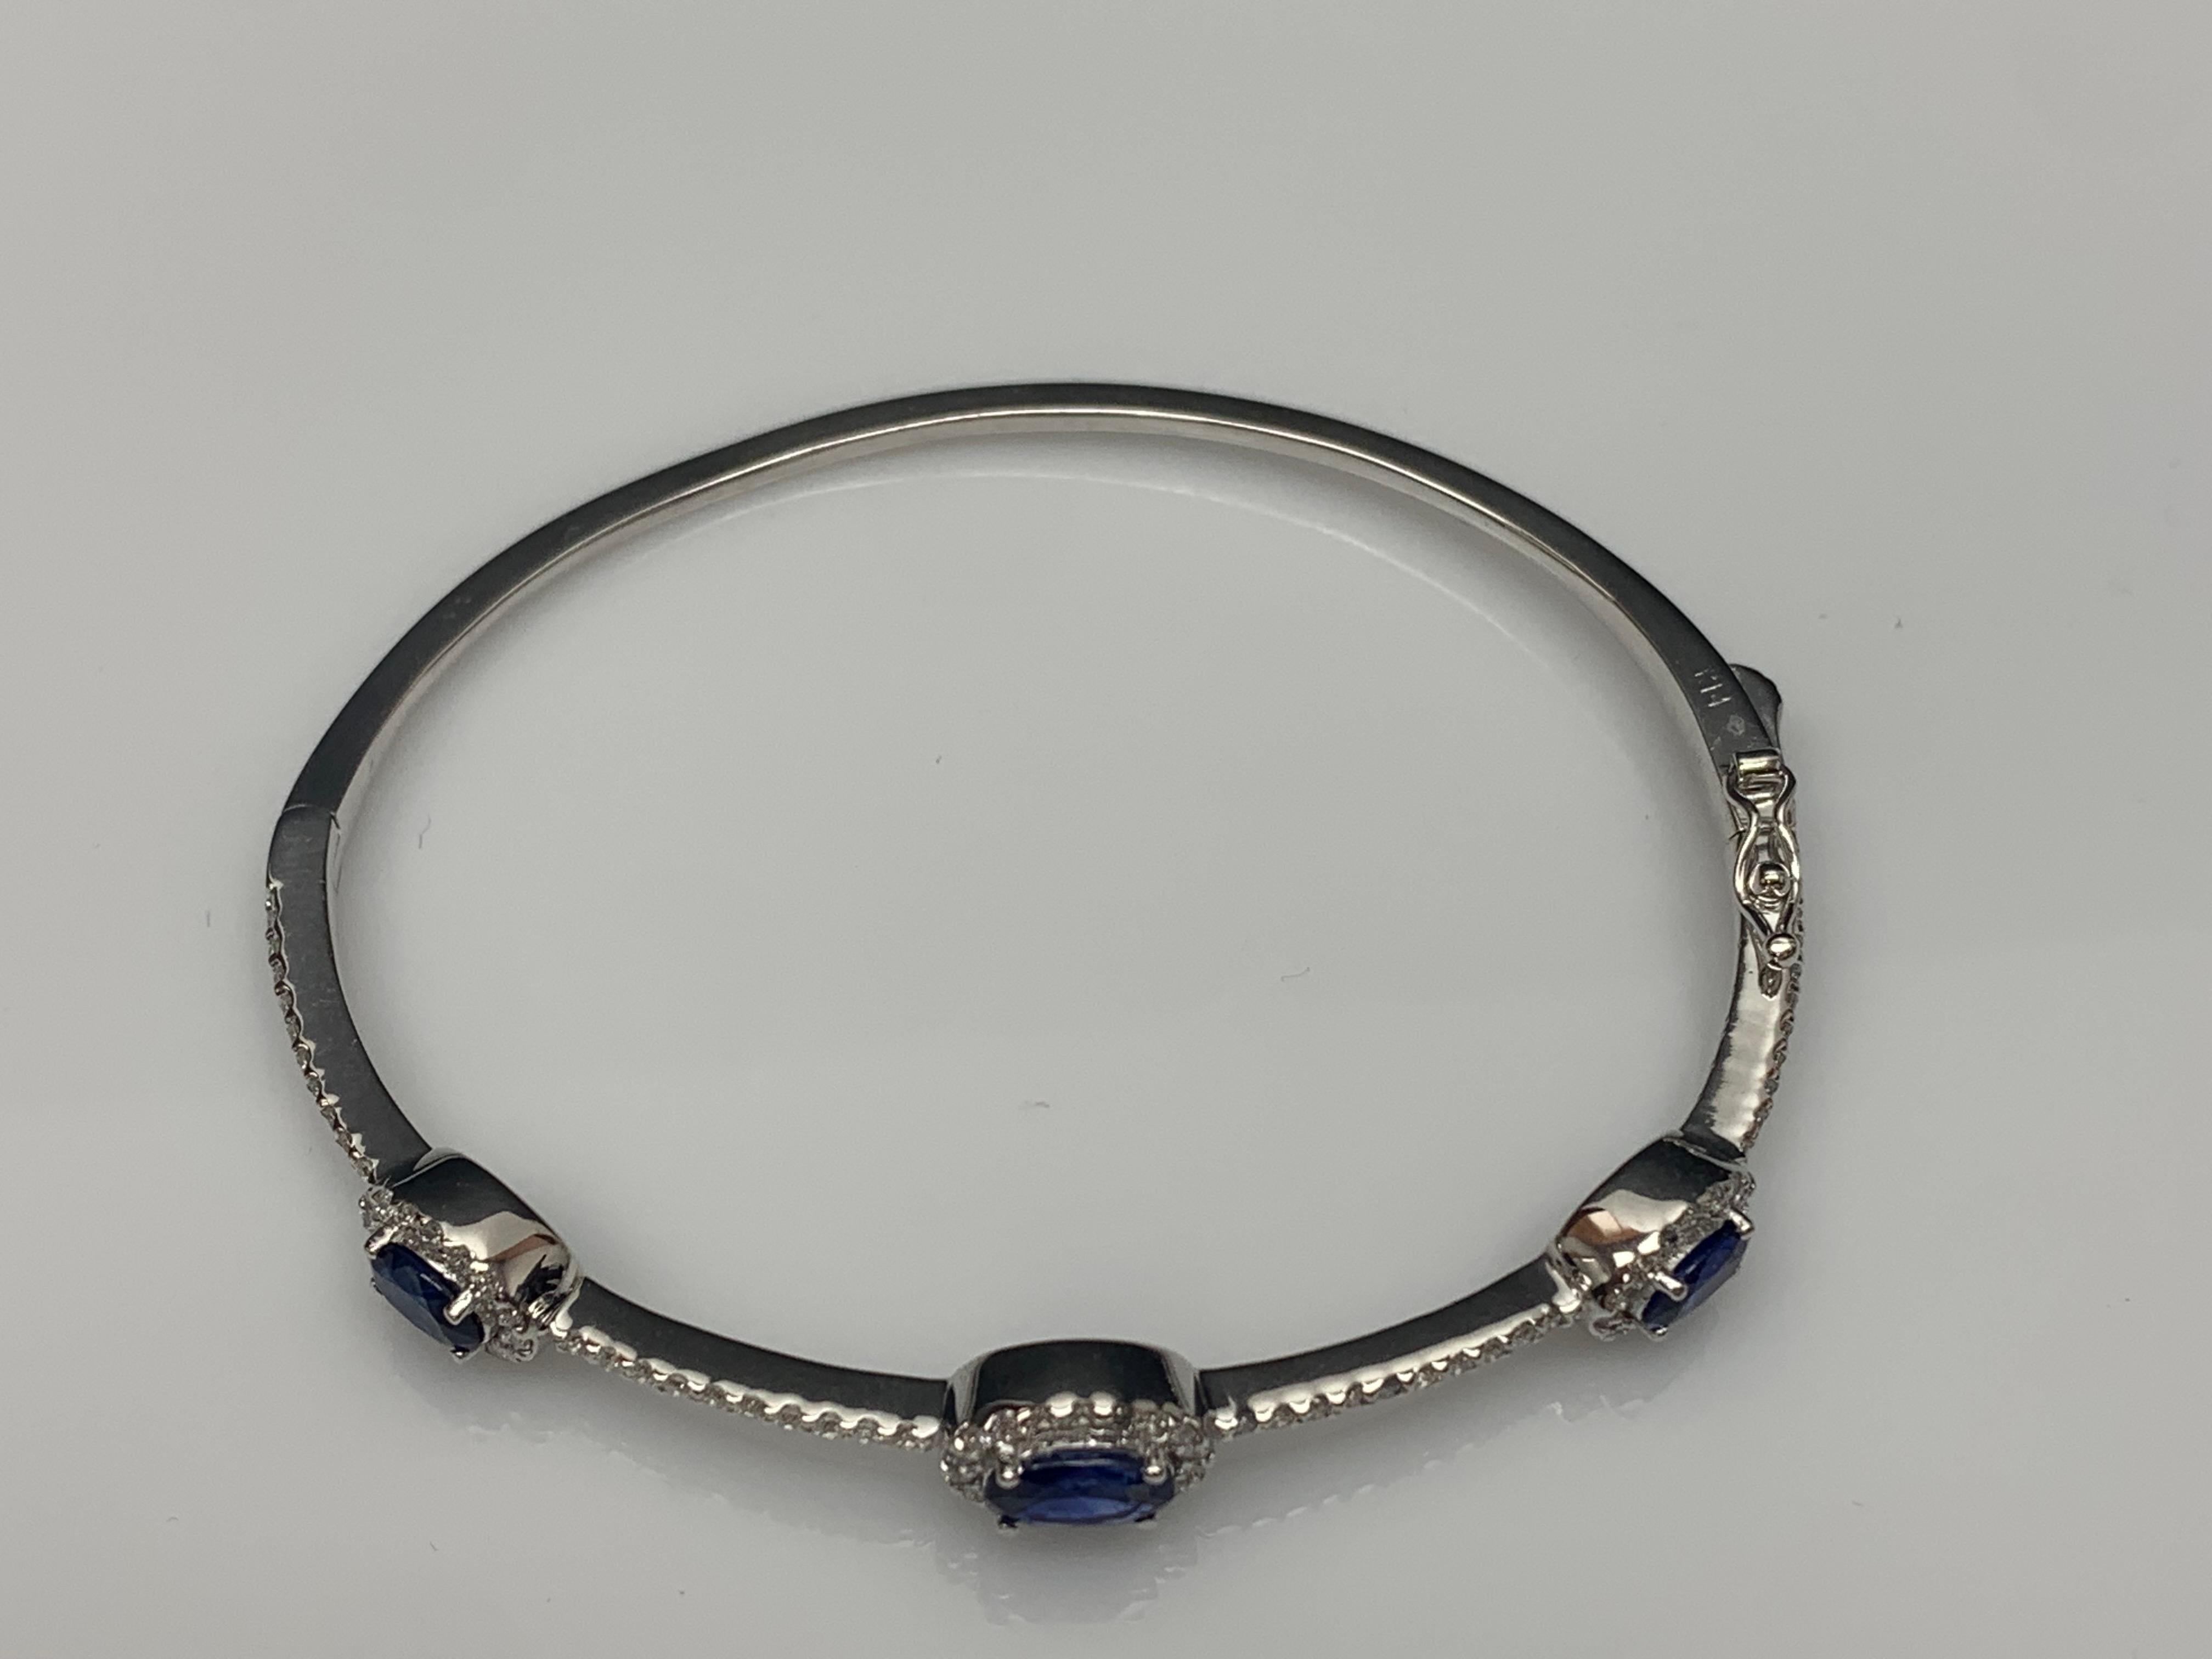 1.80 Carat Oval Cut Sapphire and Diamond Bangle Bracelet in 14K White Gold In New Condition For Sale In NEW YORK, NY